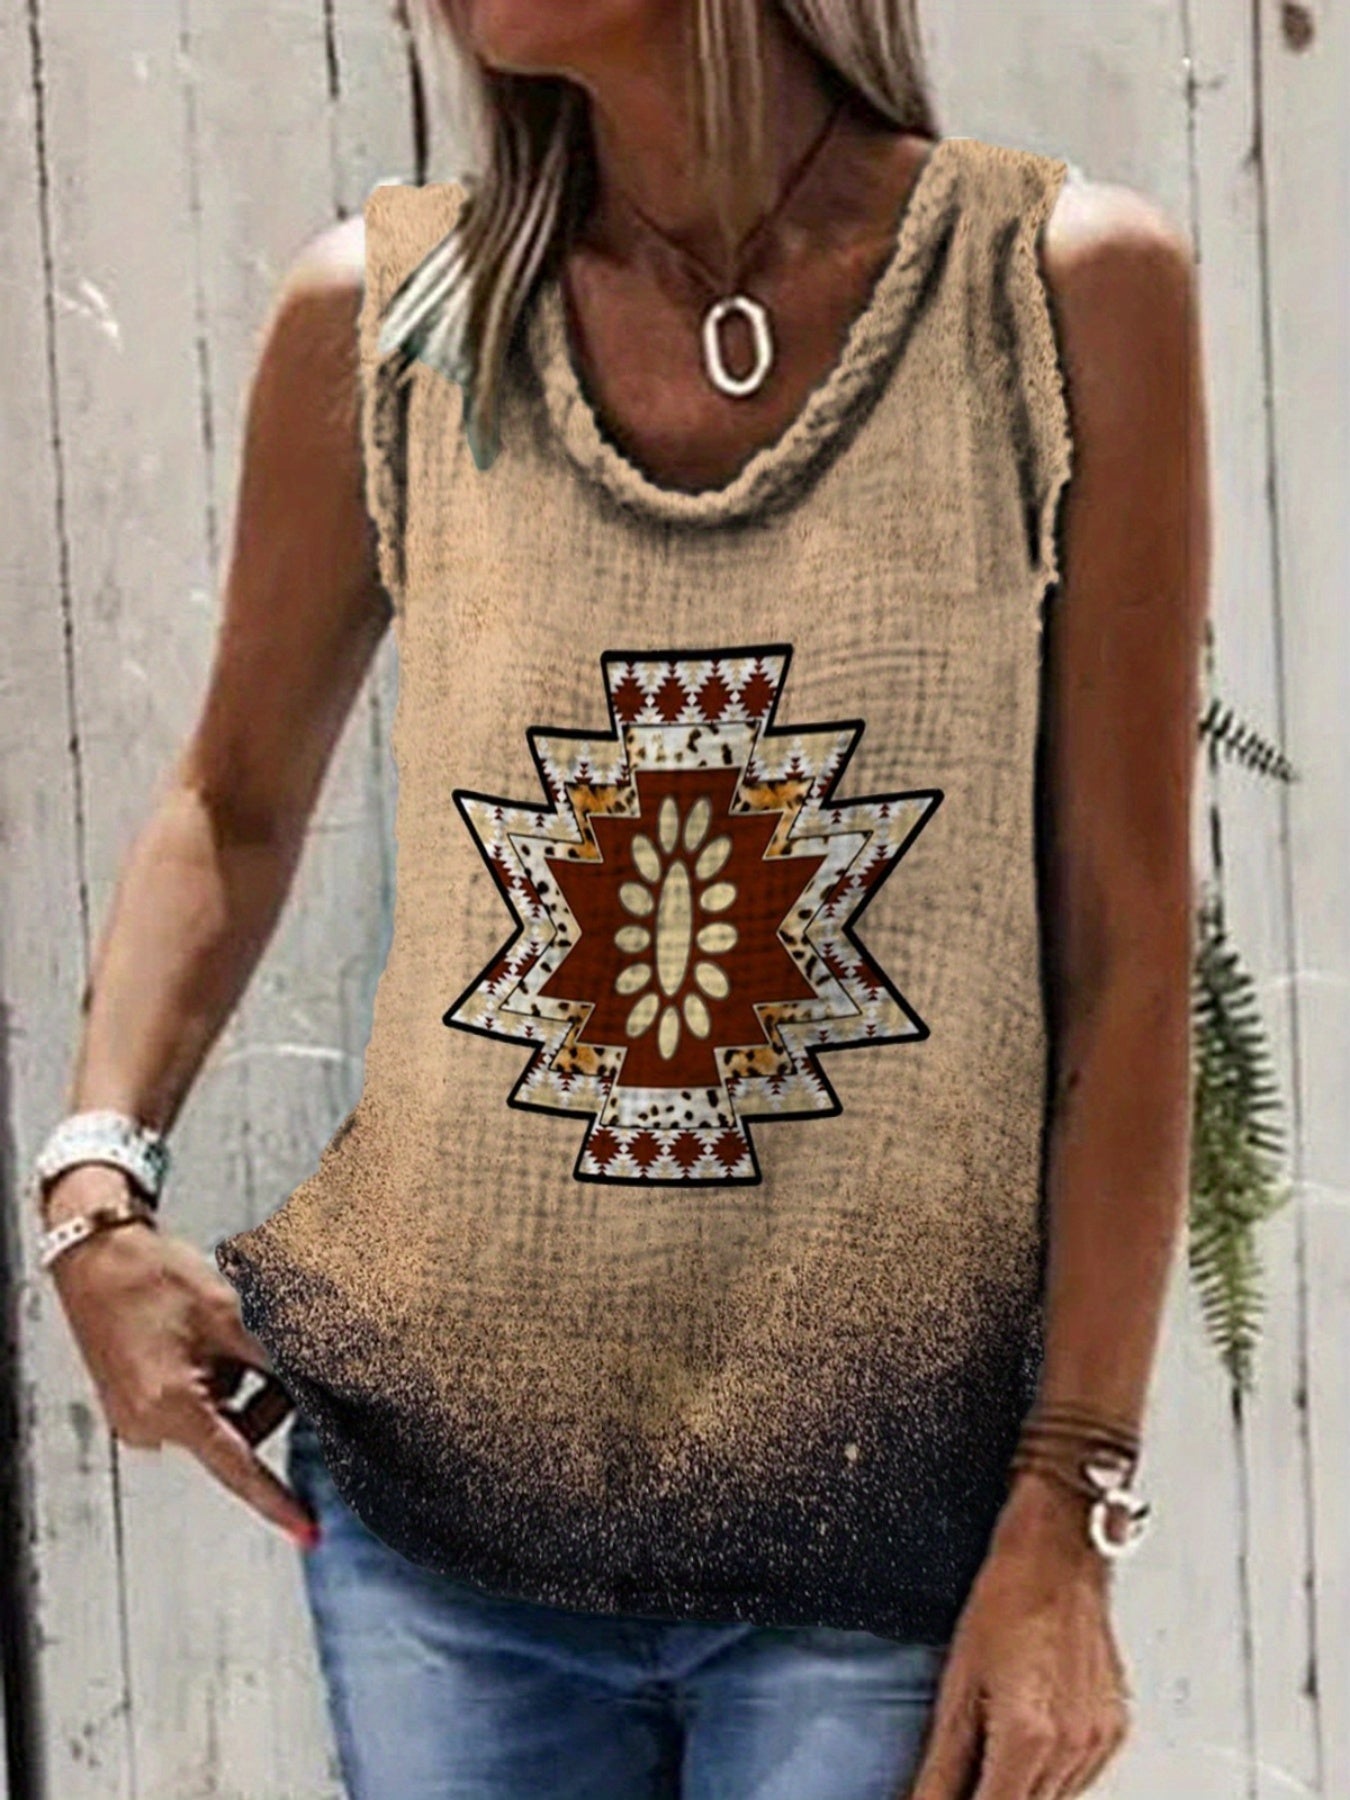 Vzyzv Summer Tank Top: Feather Print + Ethnic Style + Casual Wear for Women